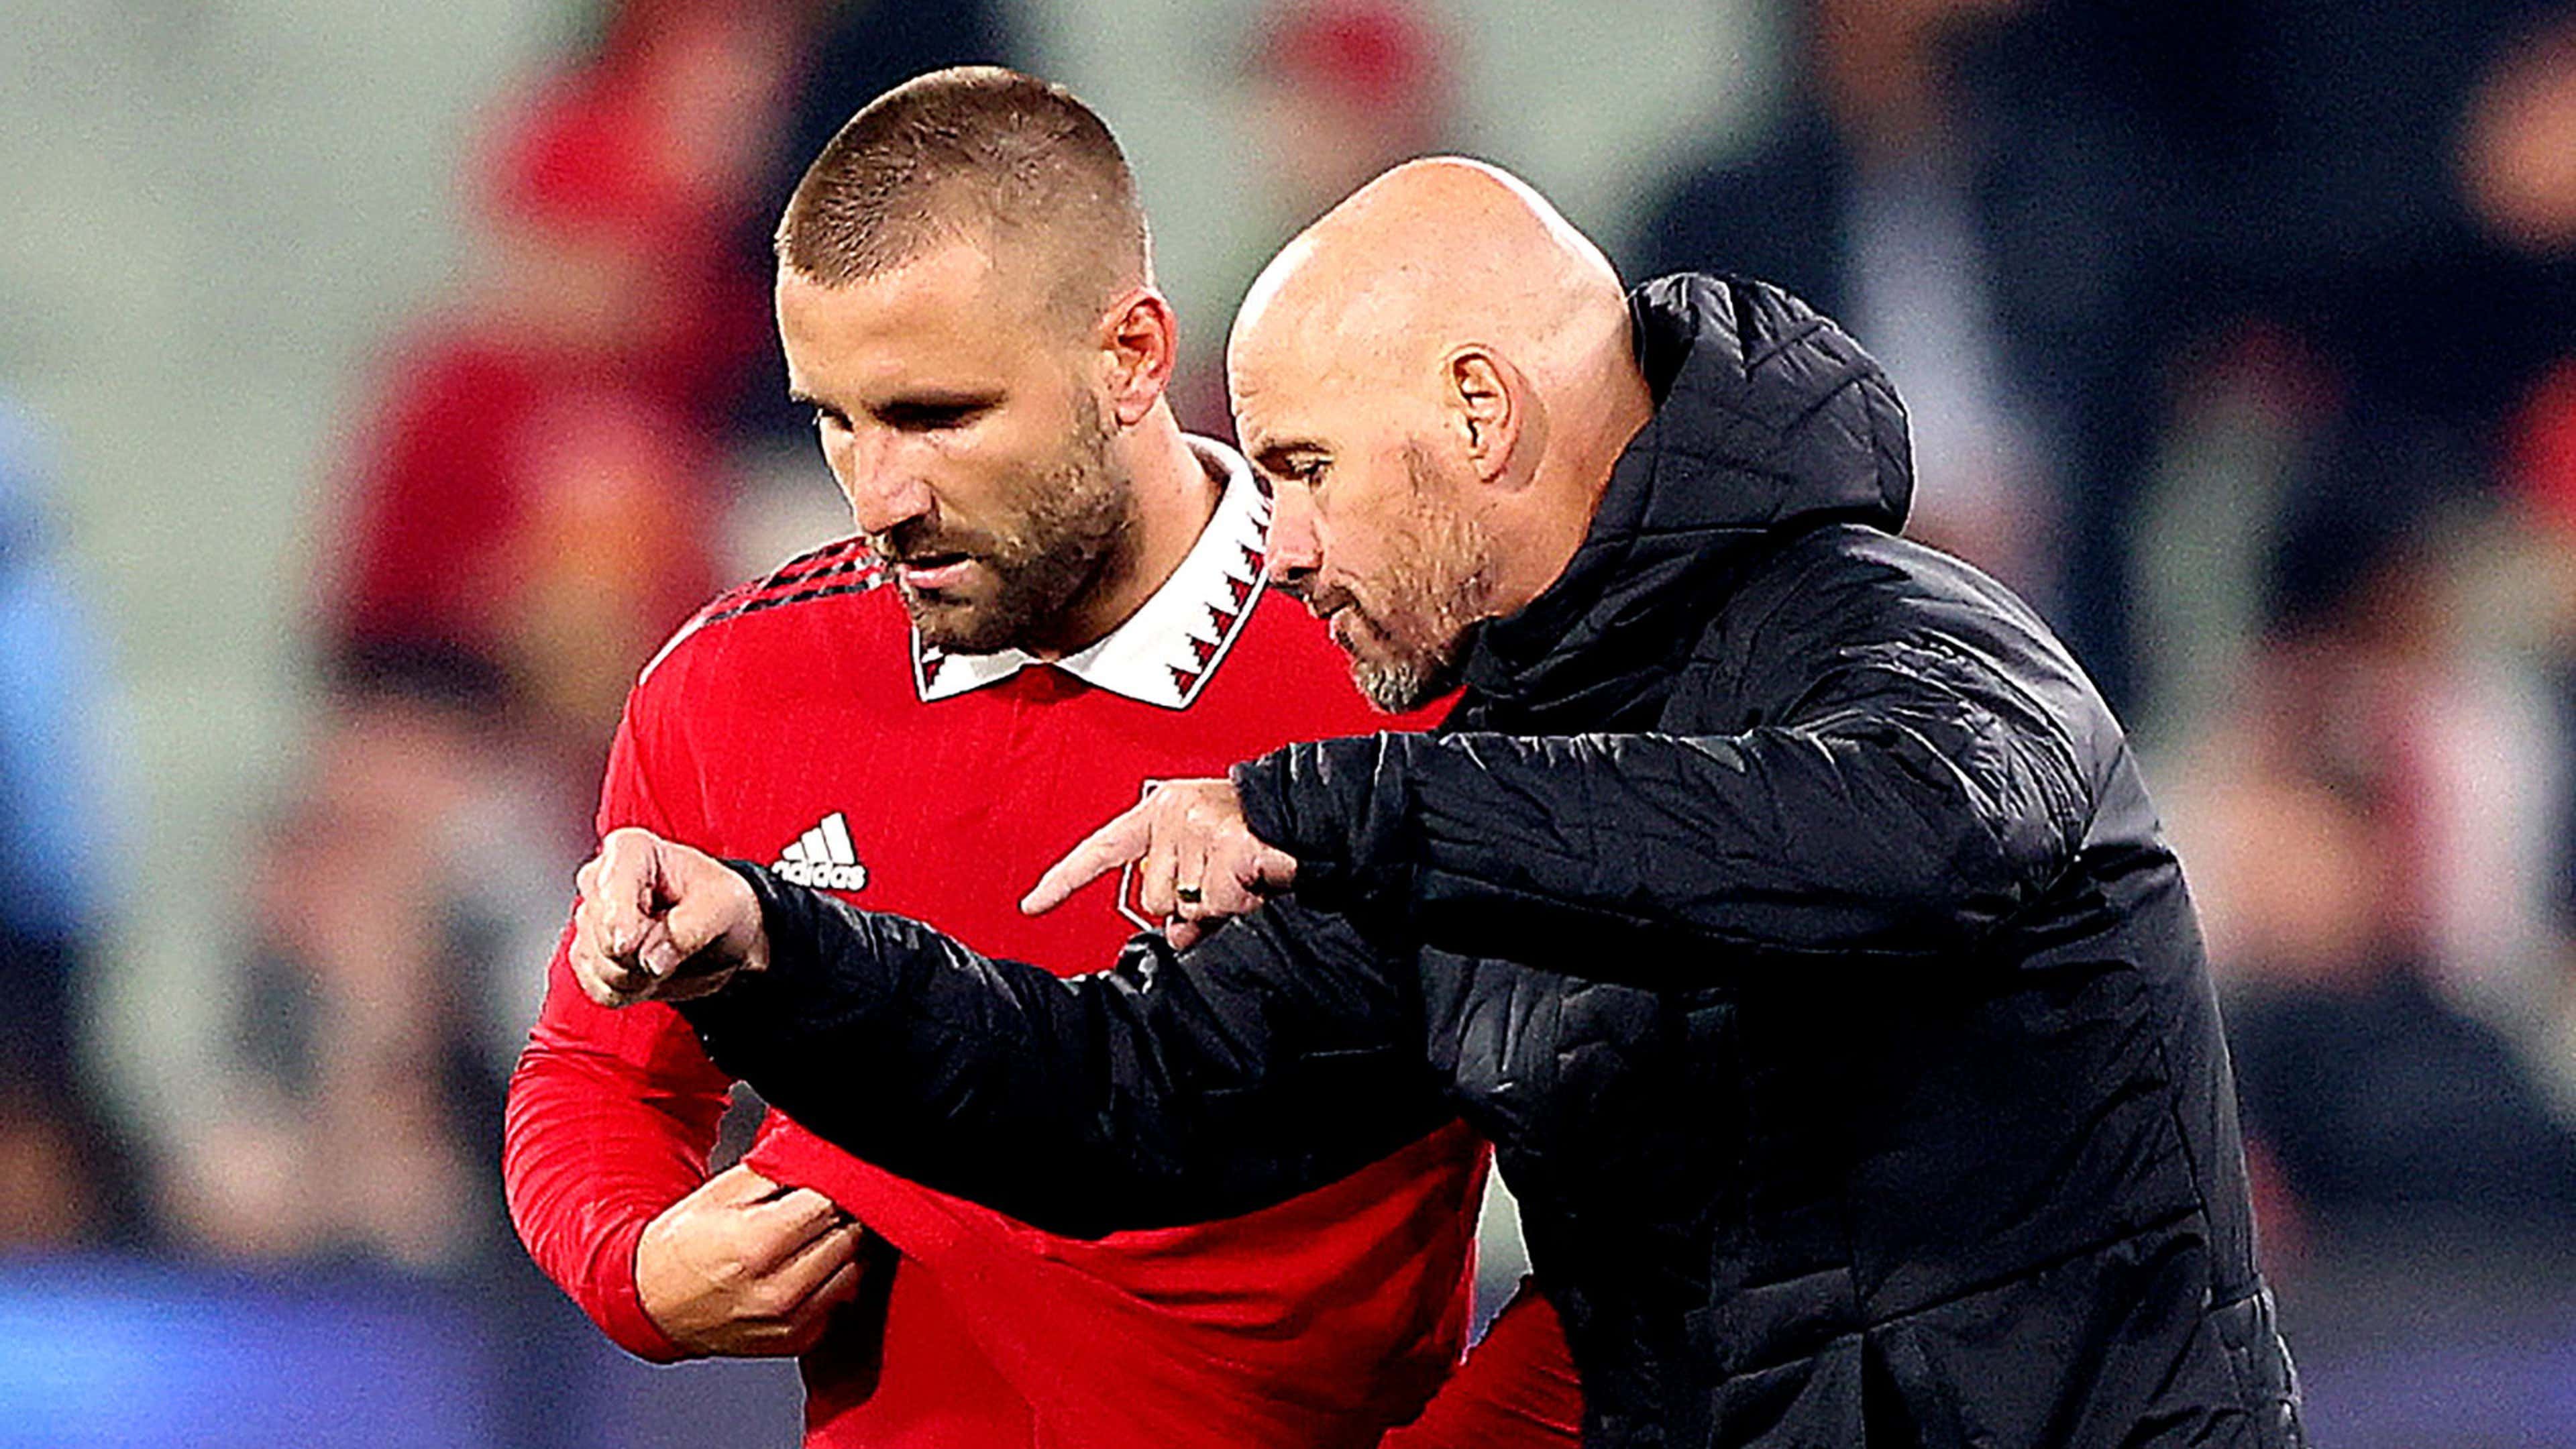 Man Utd boss Ten Hag admits he could continue to use Shaw at centre-back despite Martinez's return | Goal.com